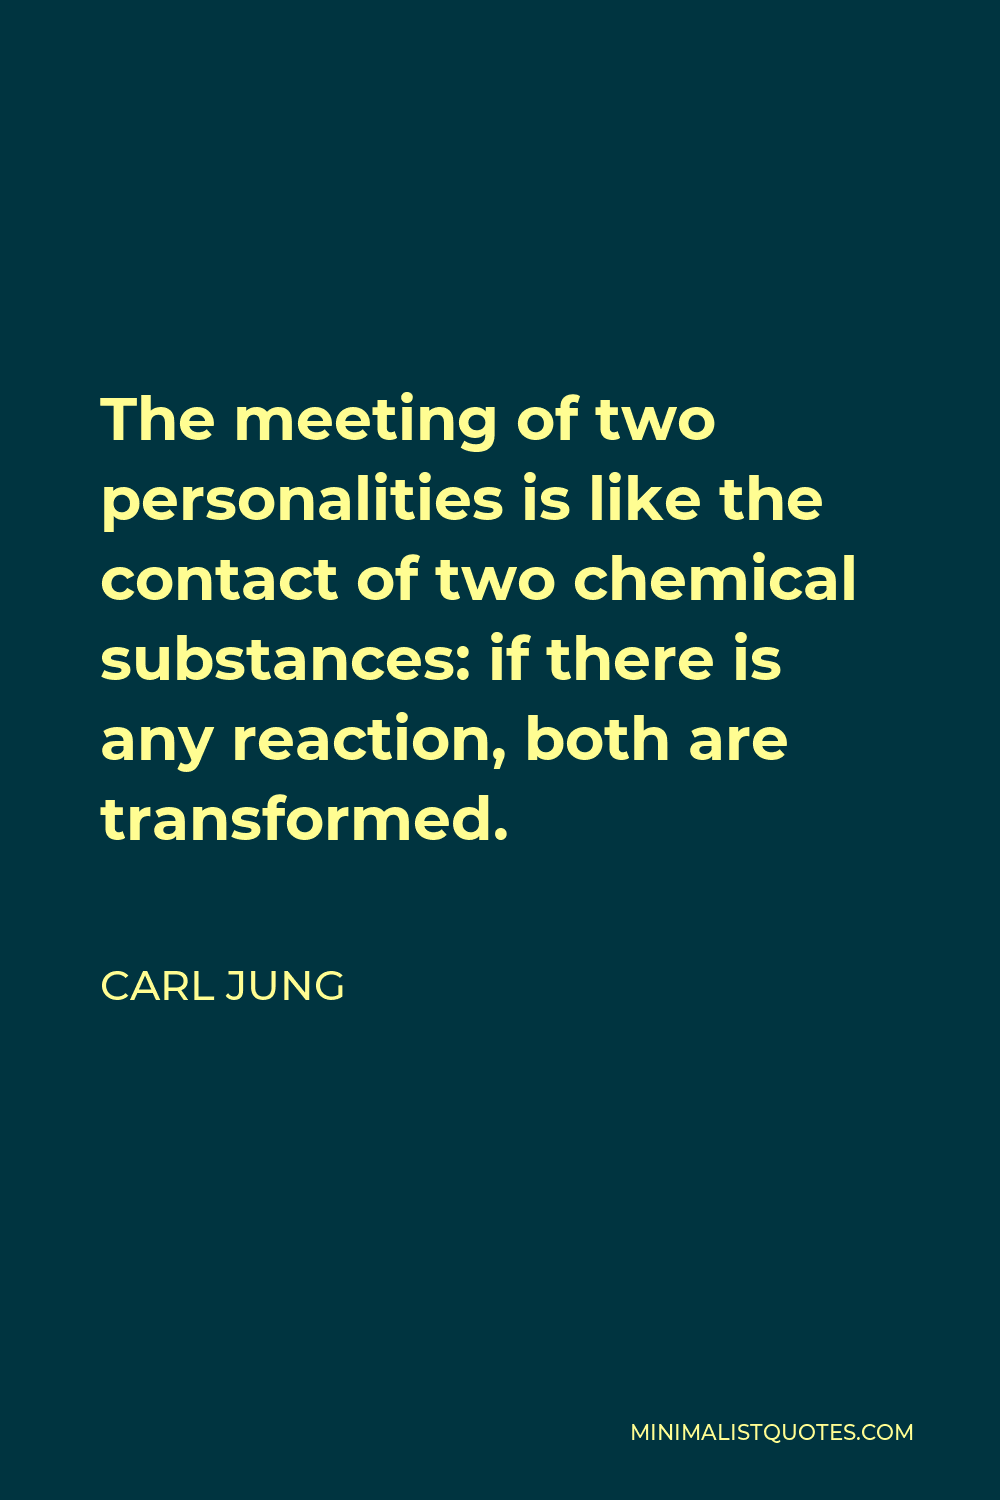 Carl Jung Quote - The meeting of two personalities is like the contact of two chemical substances: if there is any reaction, both are transformed.